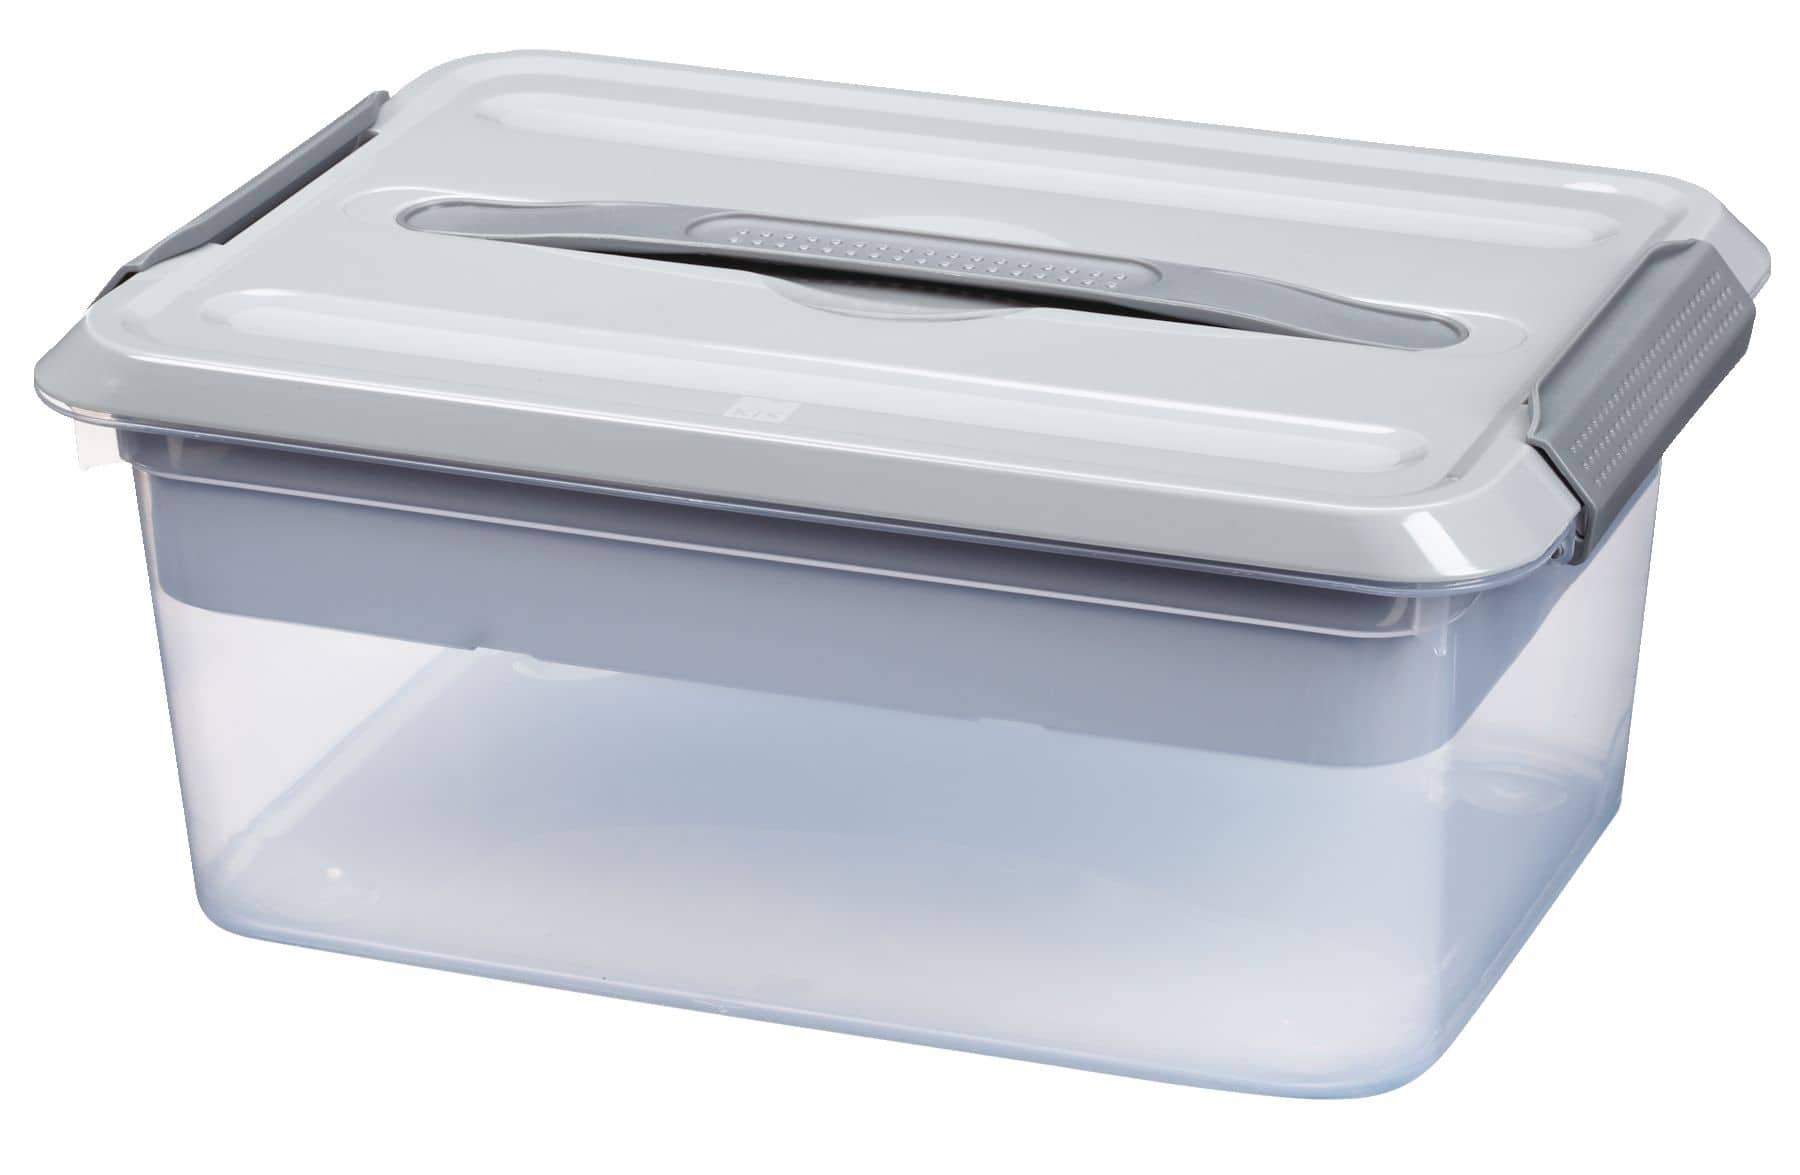 type A Transparent Storage Box with Latched Lid, Divider Tray and